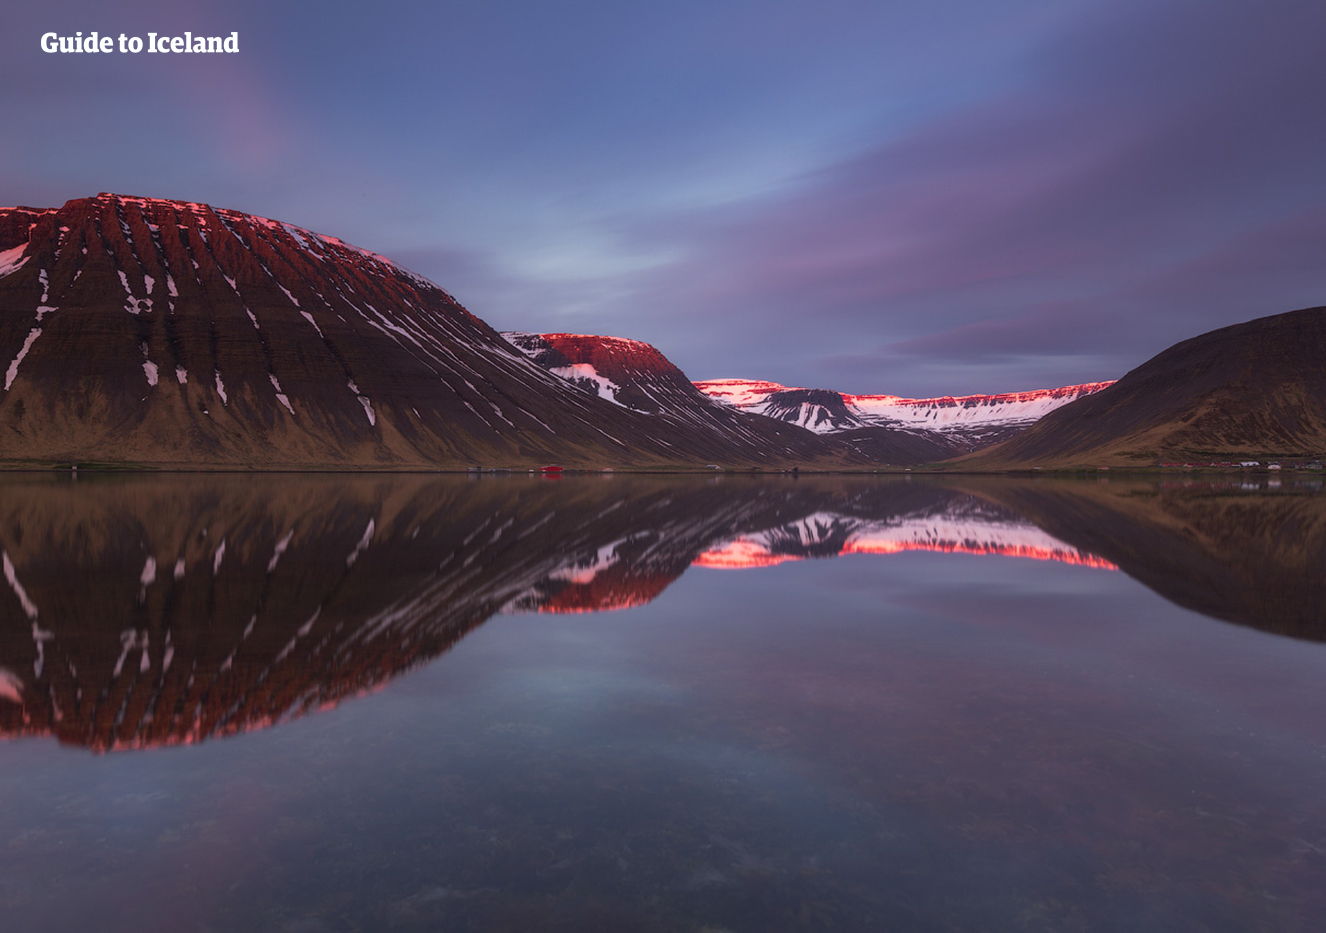 Stunning views in Iceland's Westfjords.